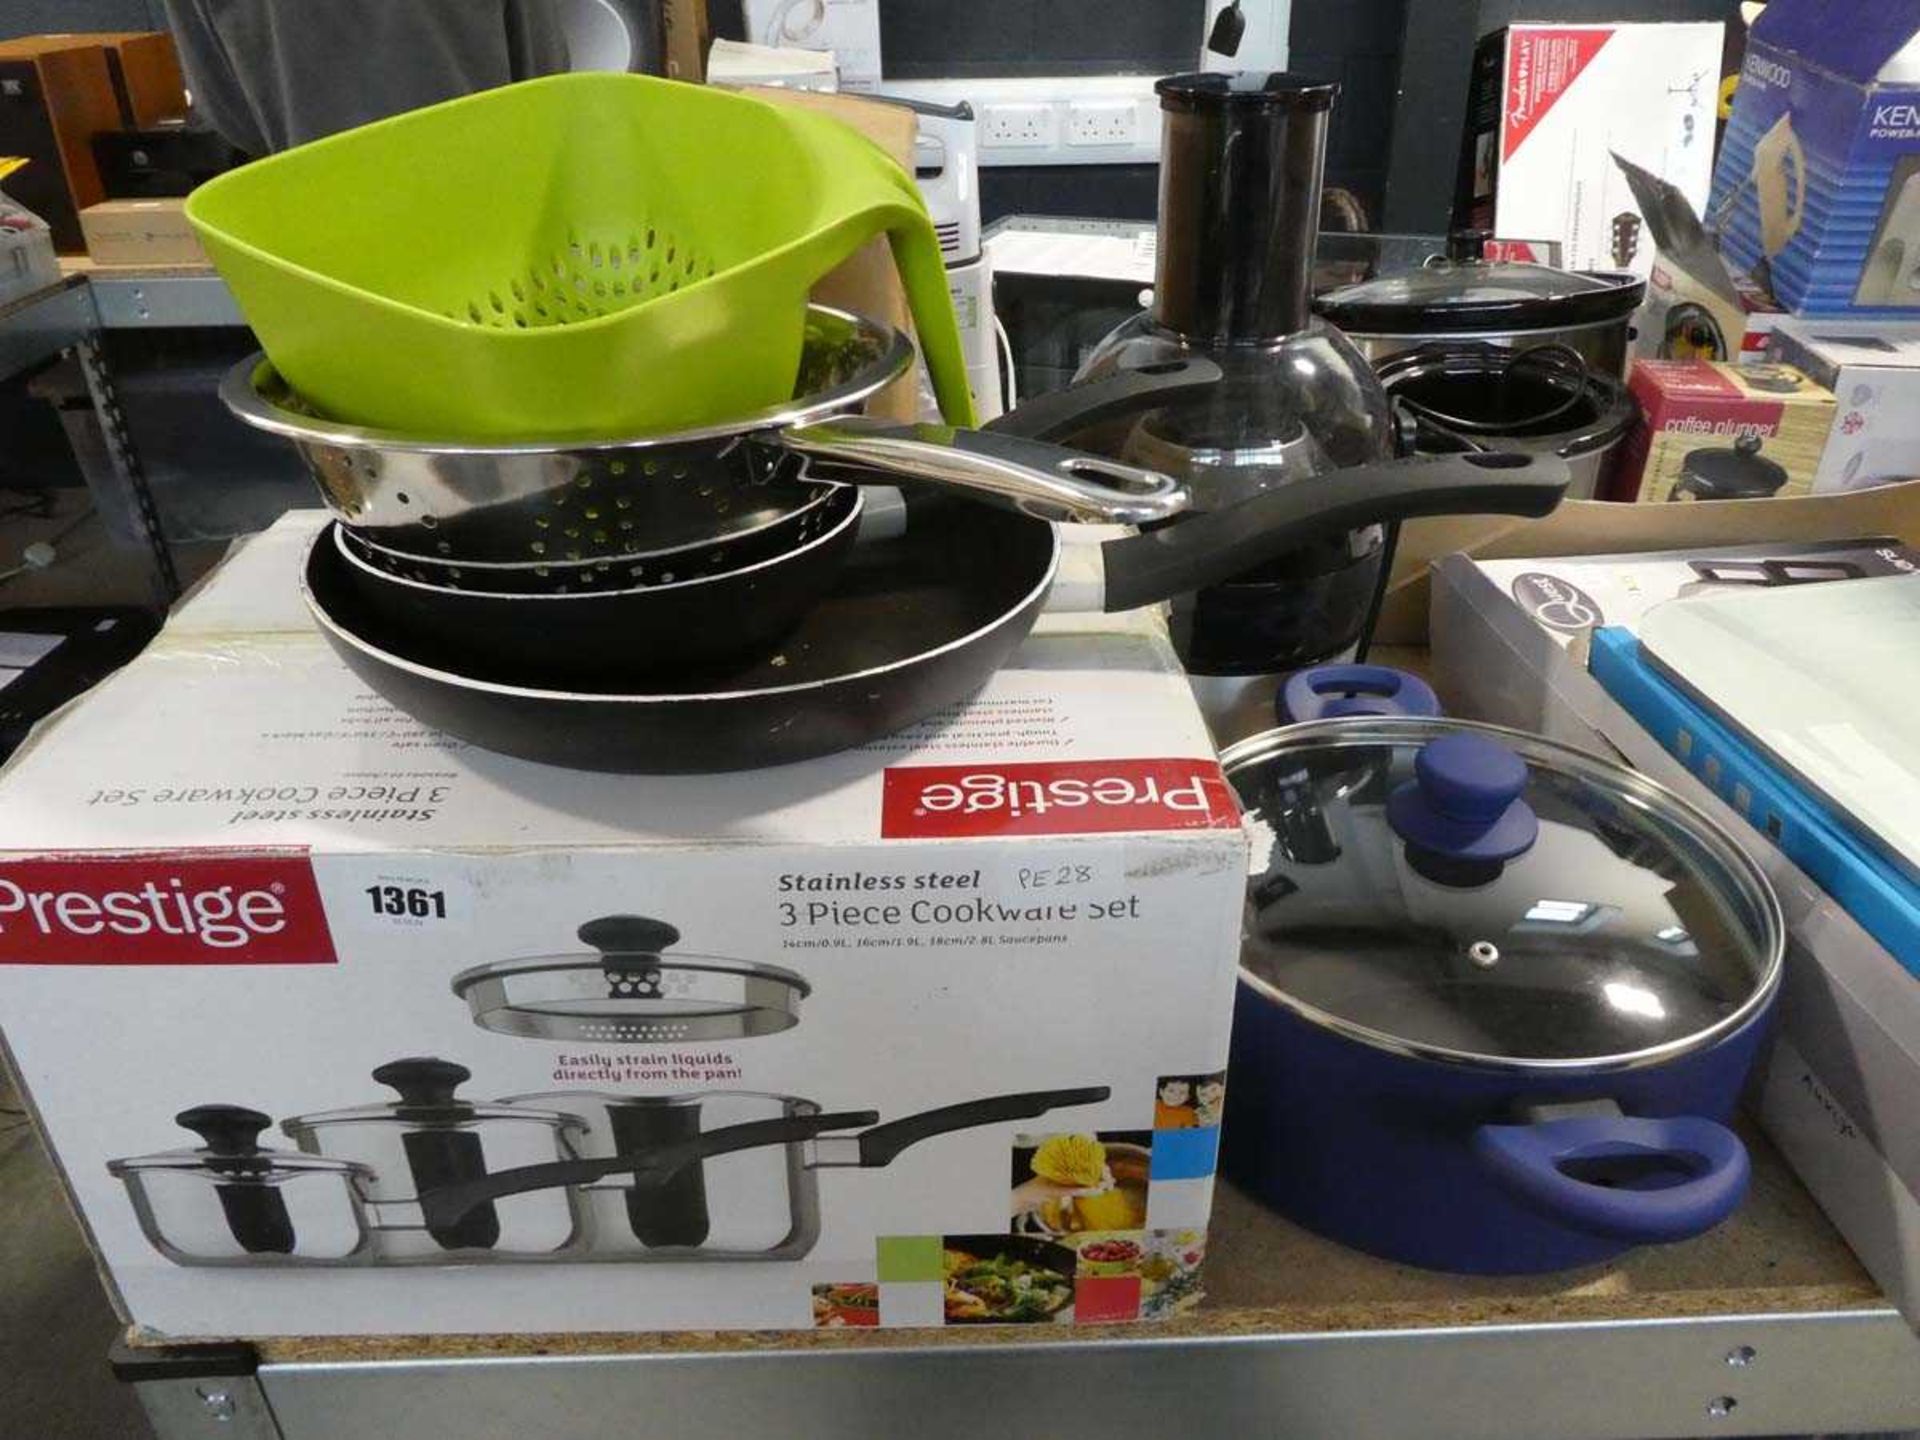 Boxed stainless steel 3 piece cookware set, together with various cookware